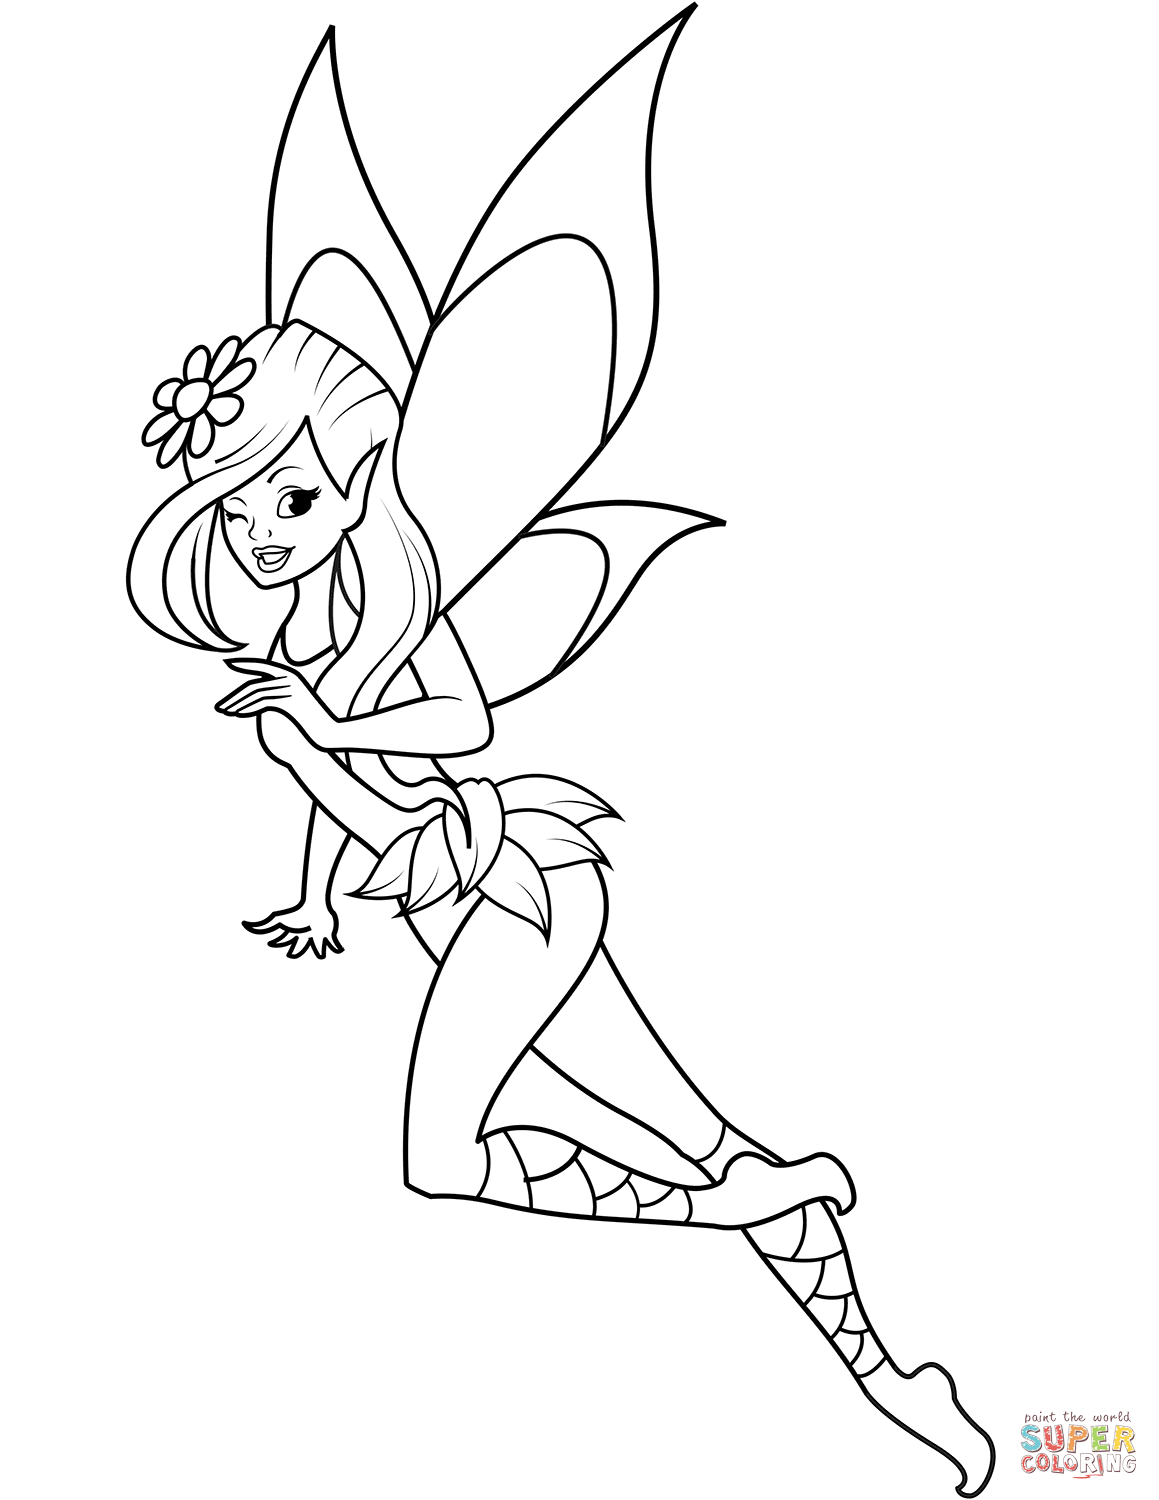 Cartoon Fairies Coloring Pages at GetColorings.com | Free ...